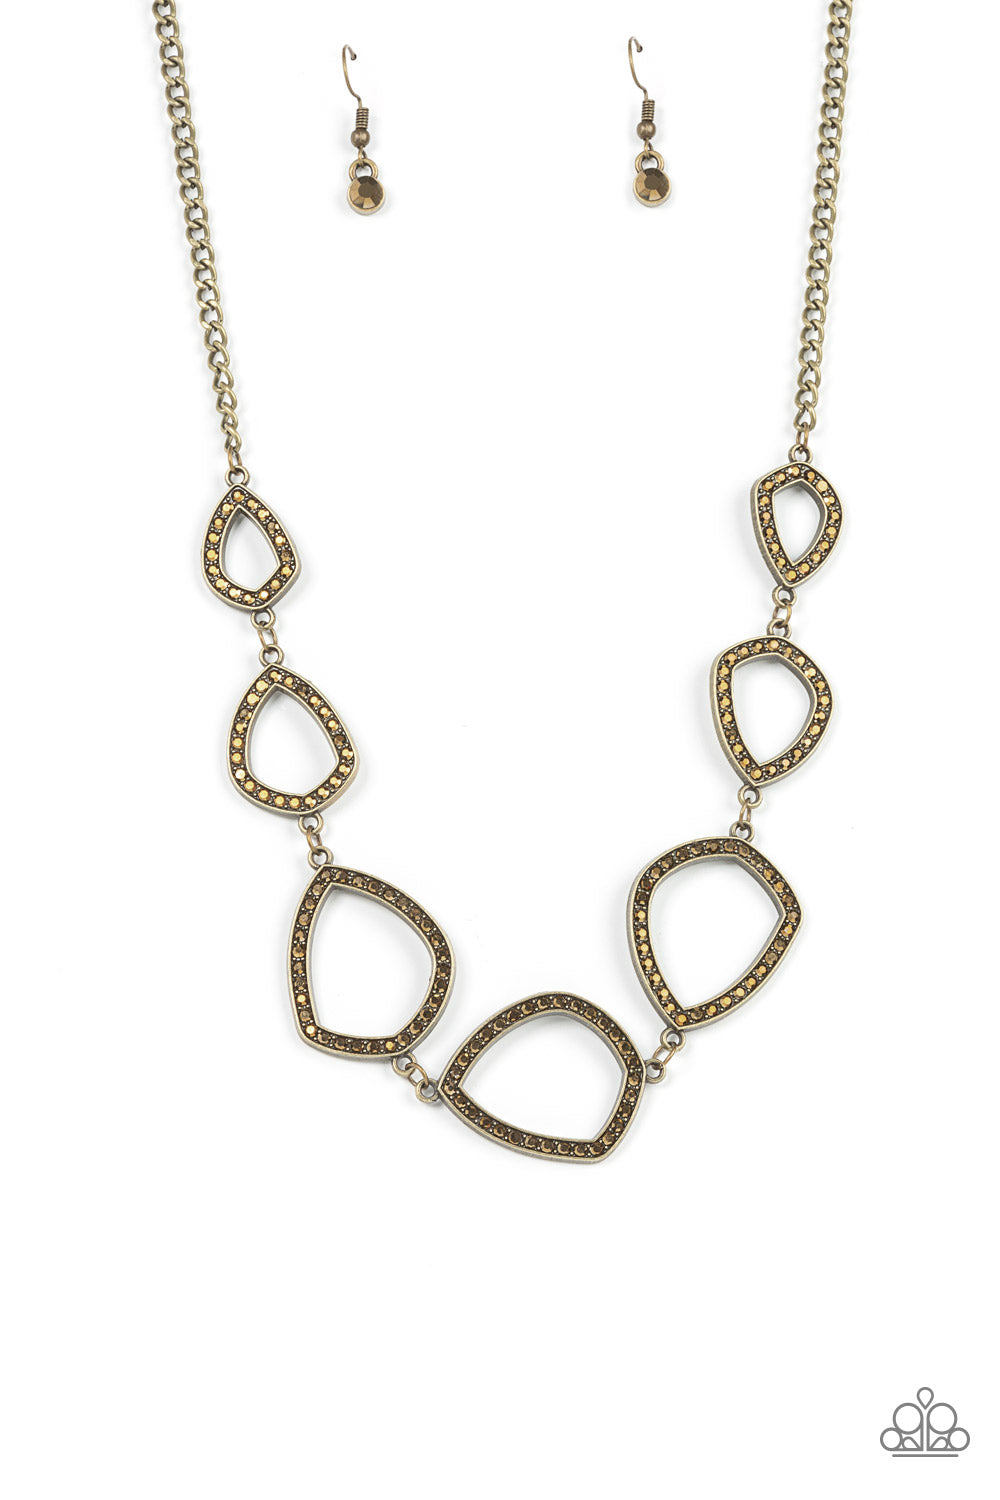 The Real Deal - Brass Necklace - Paparazzi Accessories - Encrusted in glitzy aurum rhinestones, asymmetrical teardrop and geometric brass frames delicately link below the collar for an edgy flair.